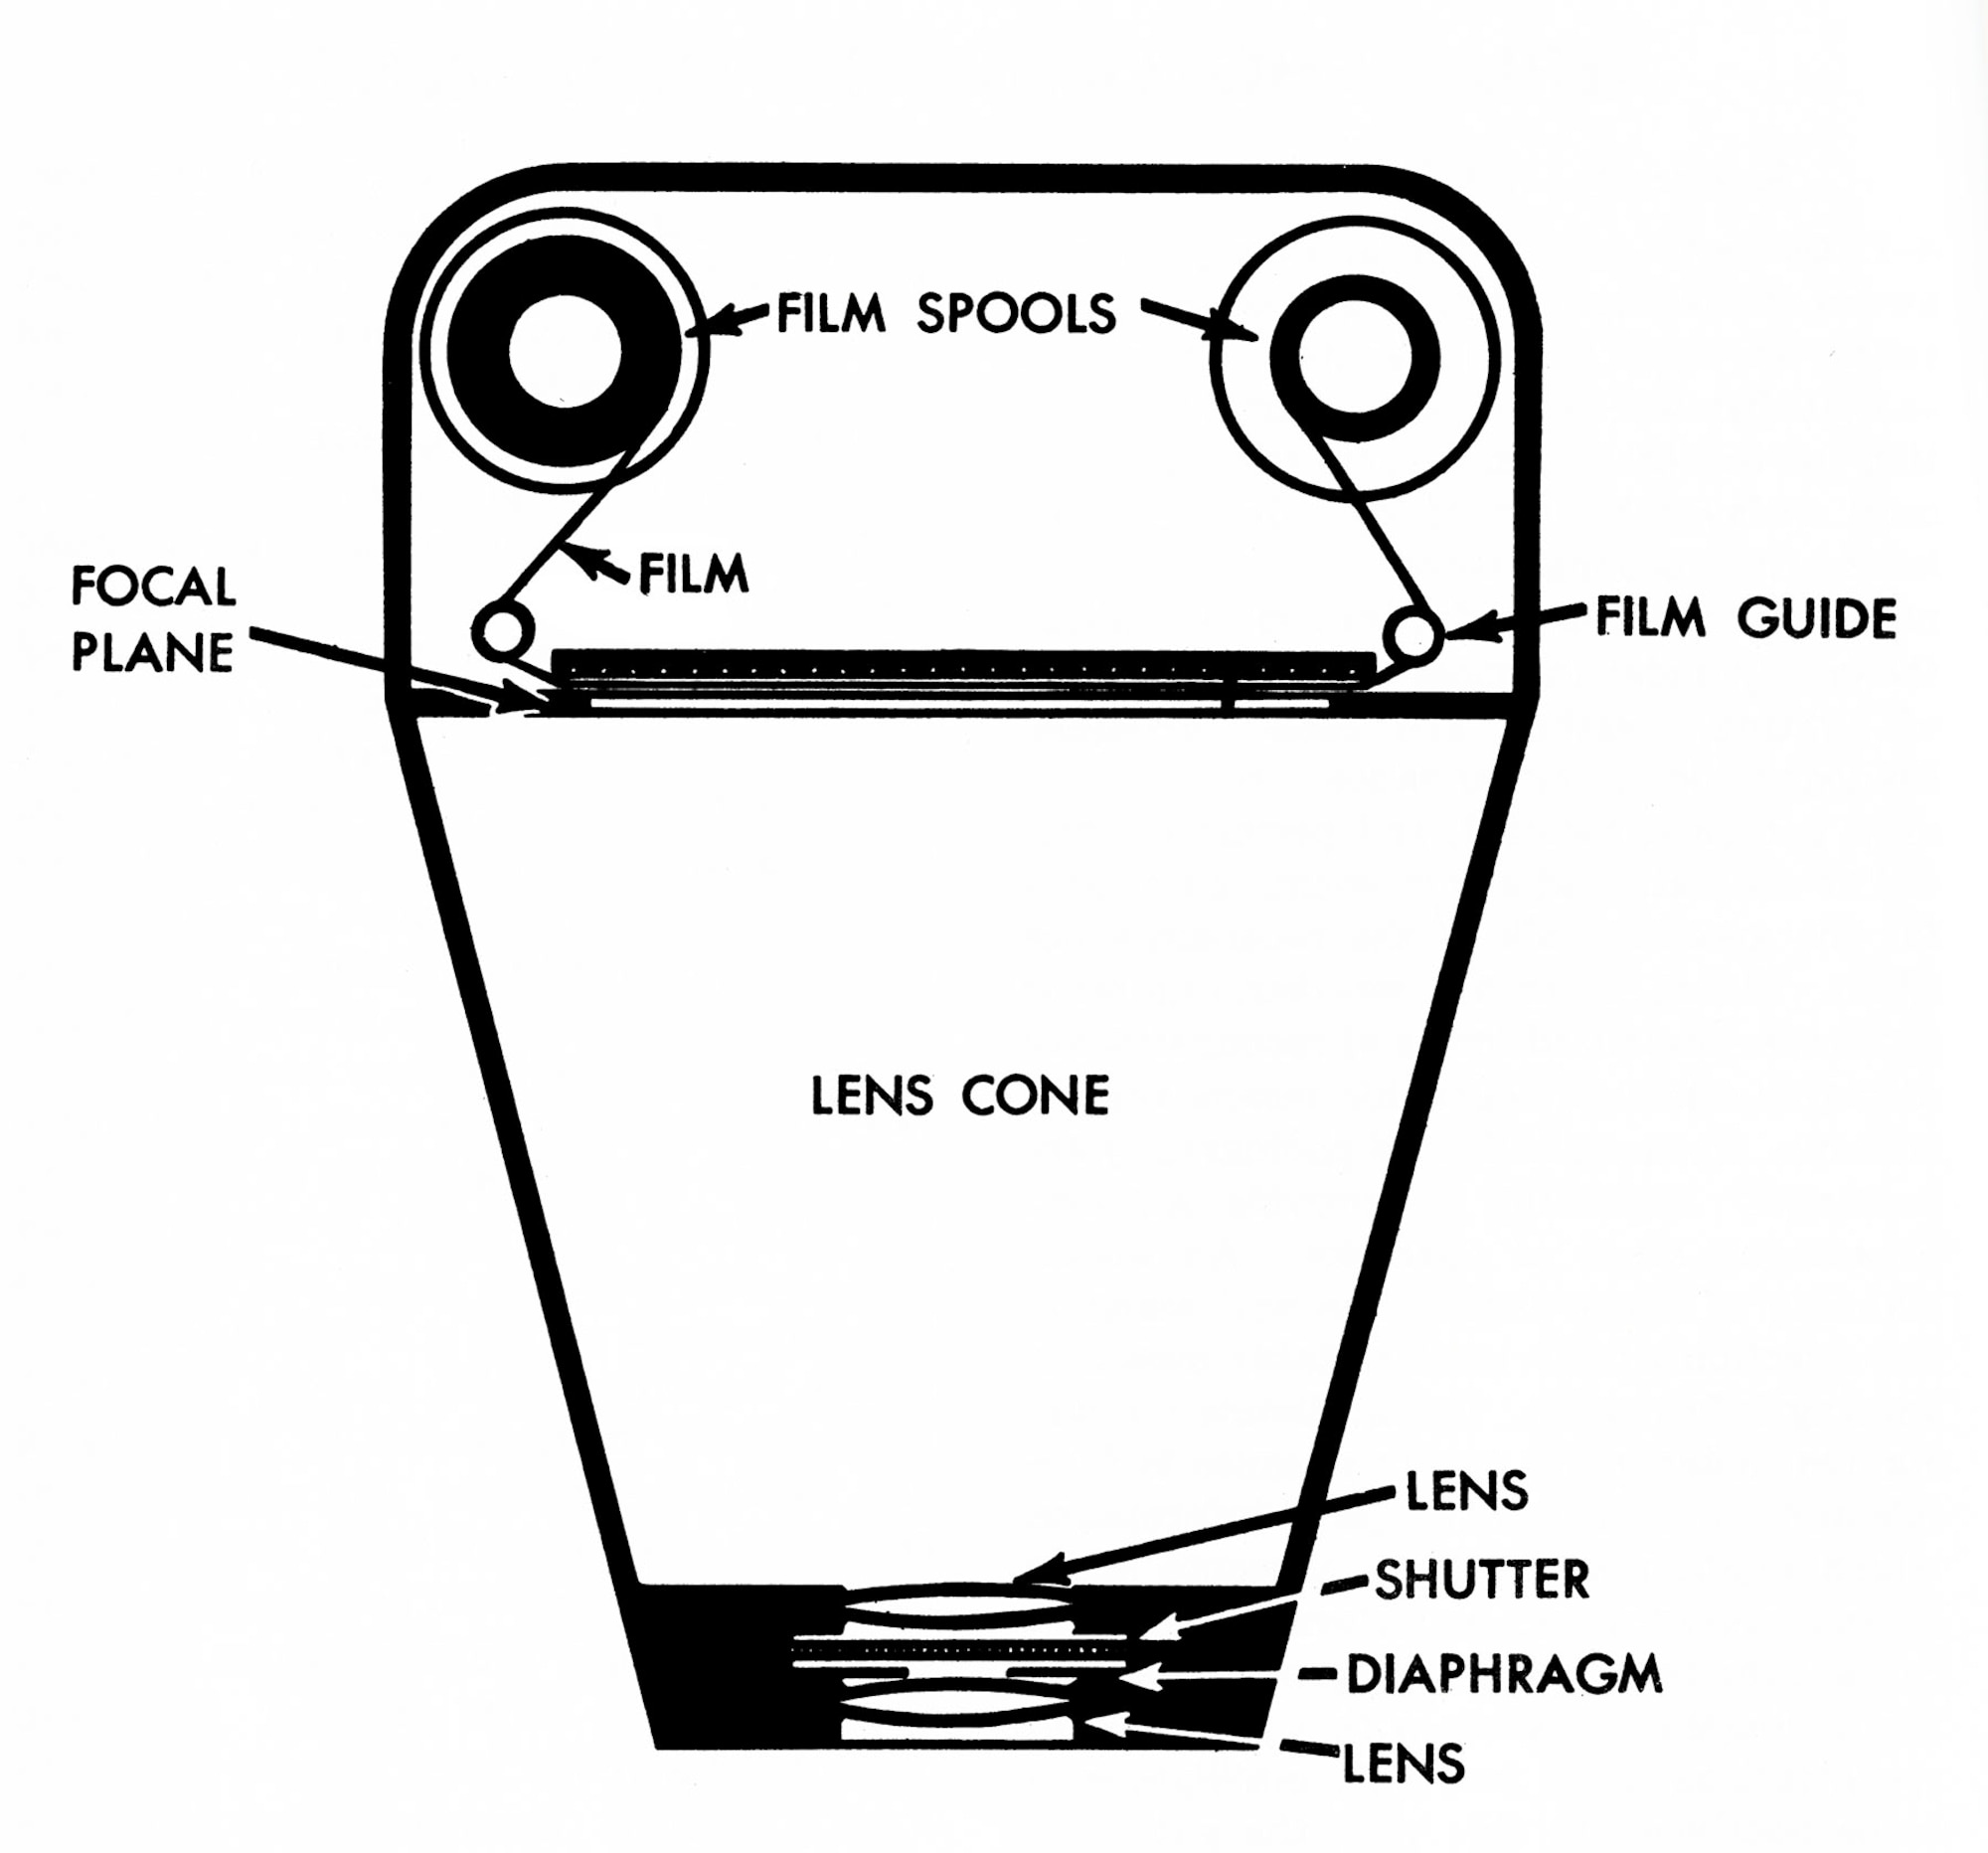 A typical aerial camera had a removable film magazine on top and an interchangeable lens cone below. Longer lens cones were for higher altitude or longer distances, while shorter cones were for low altitude.